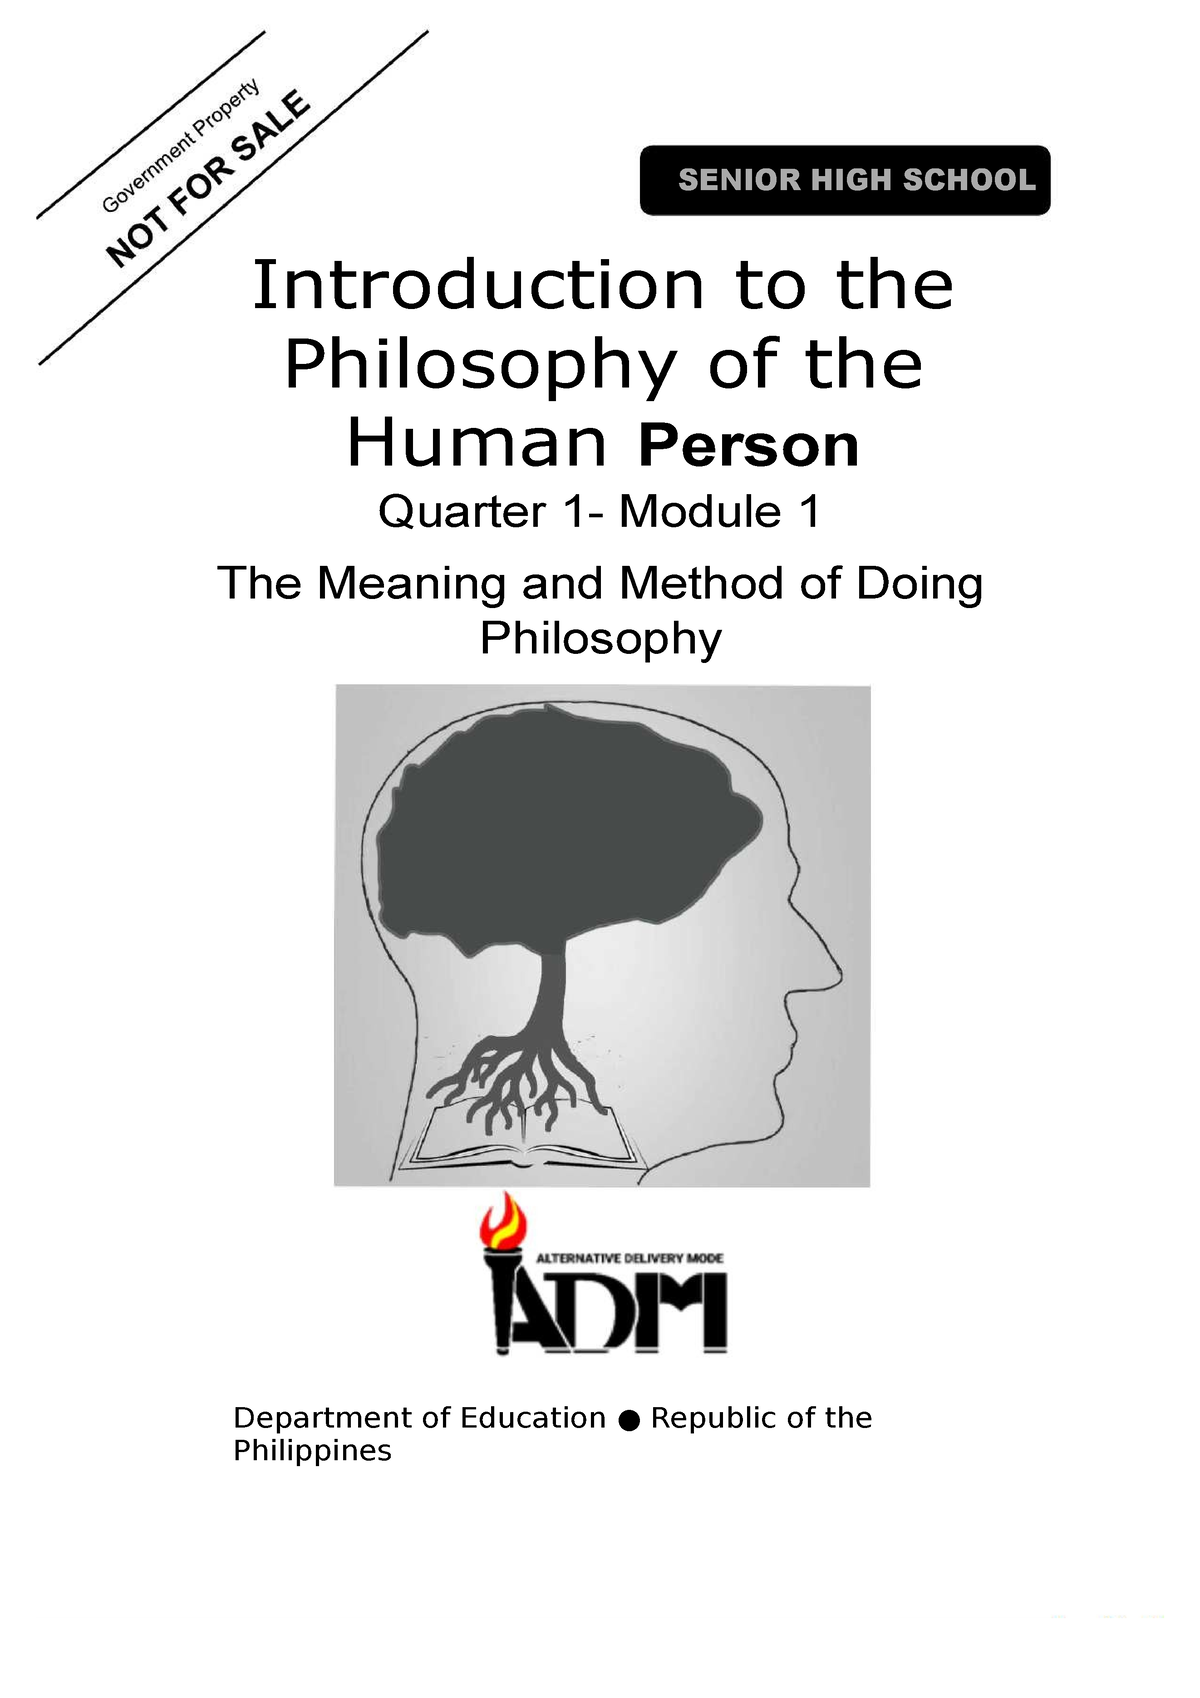 Philo Mod1 Q1 Introduction To The Philosophy Of The Human Person V3 Compress Senior High 3983